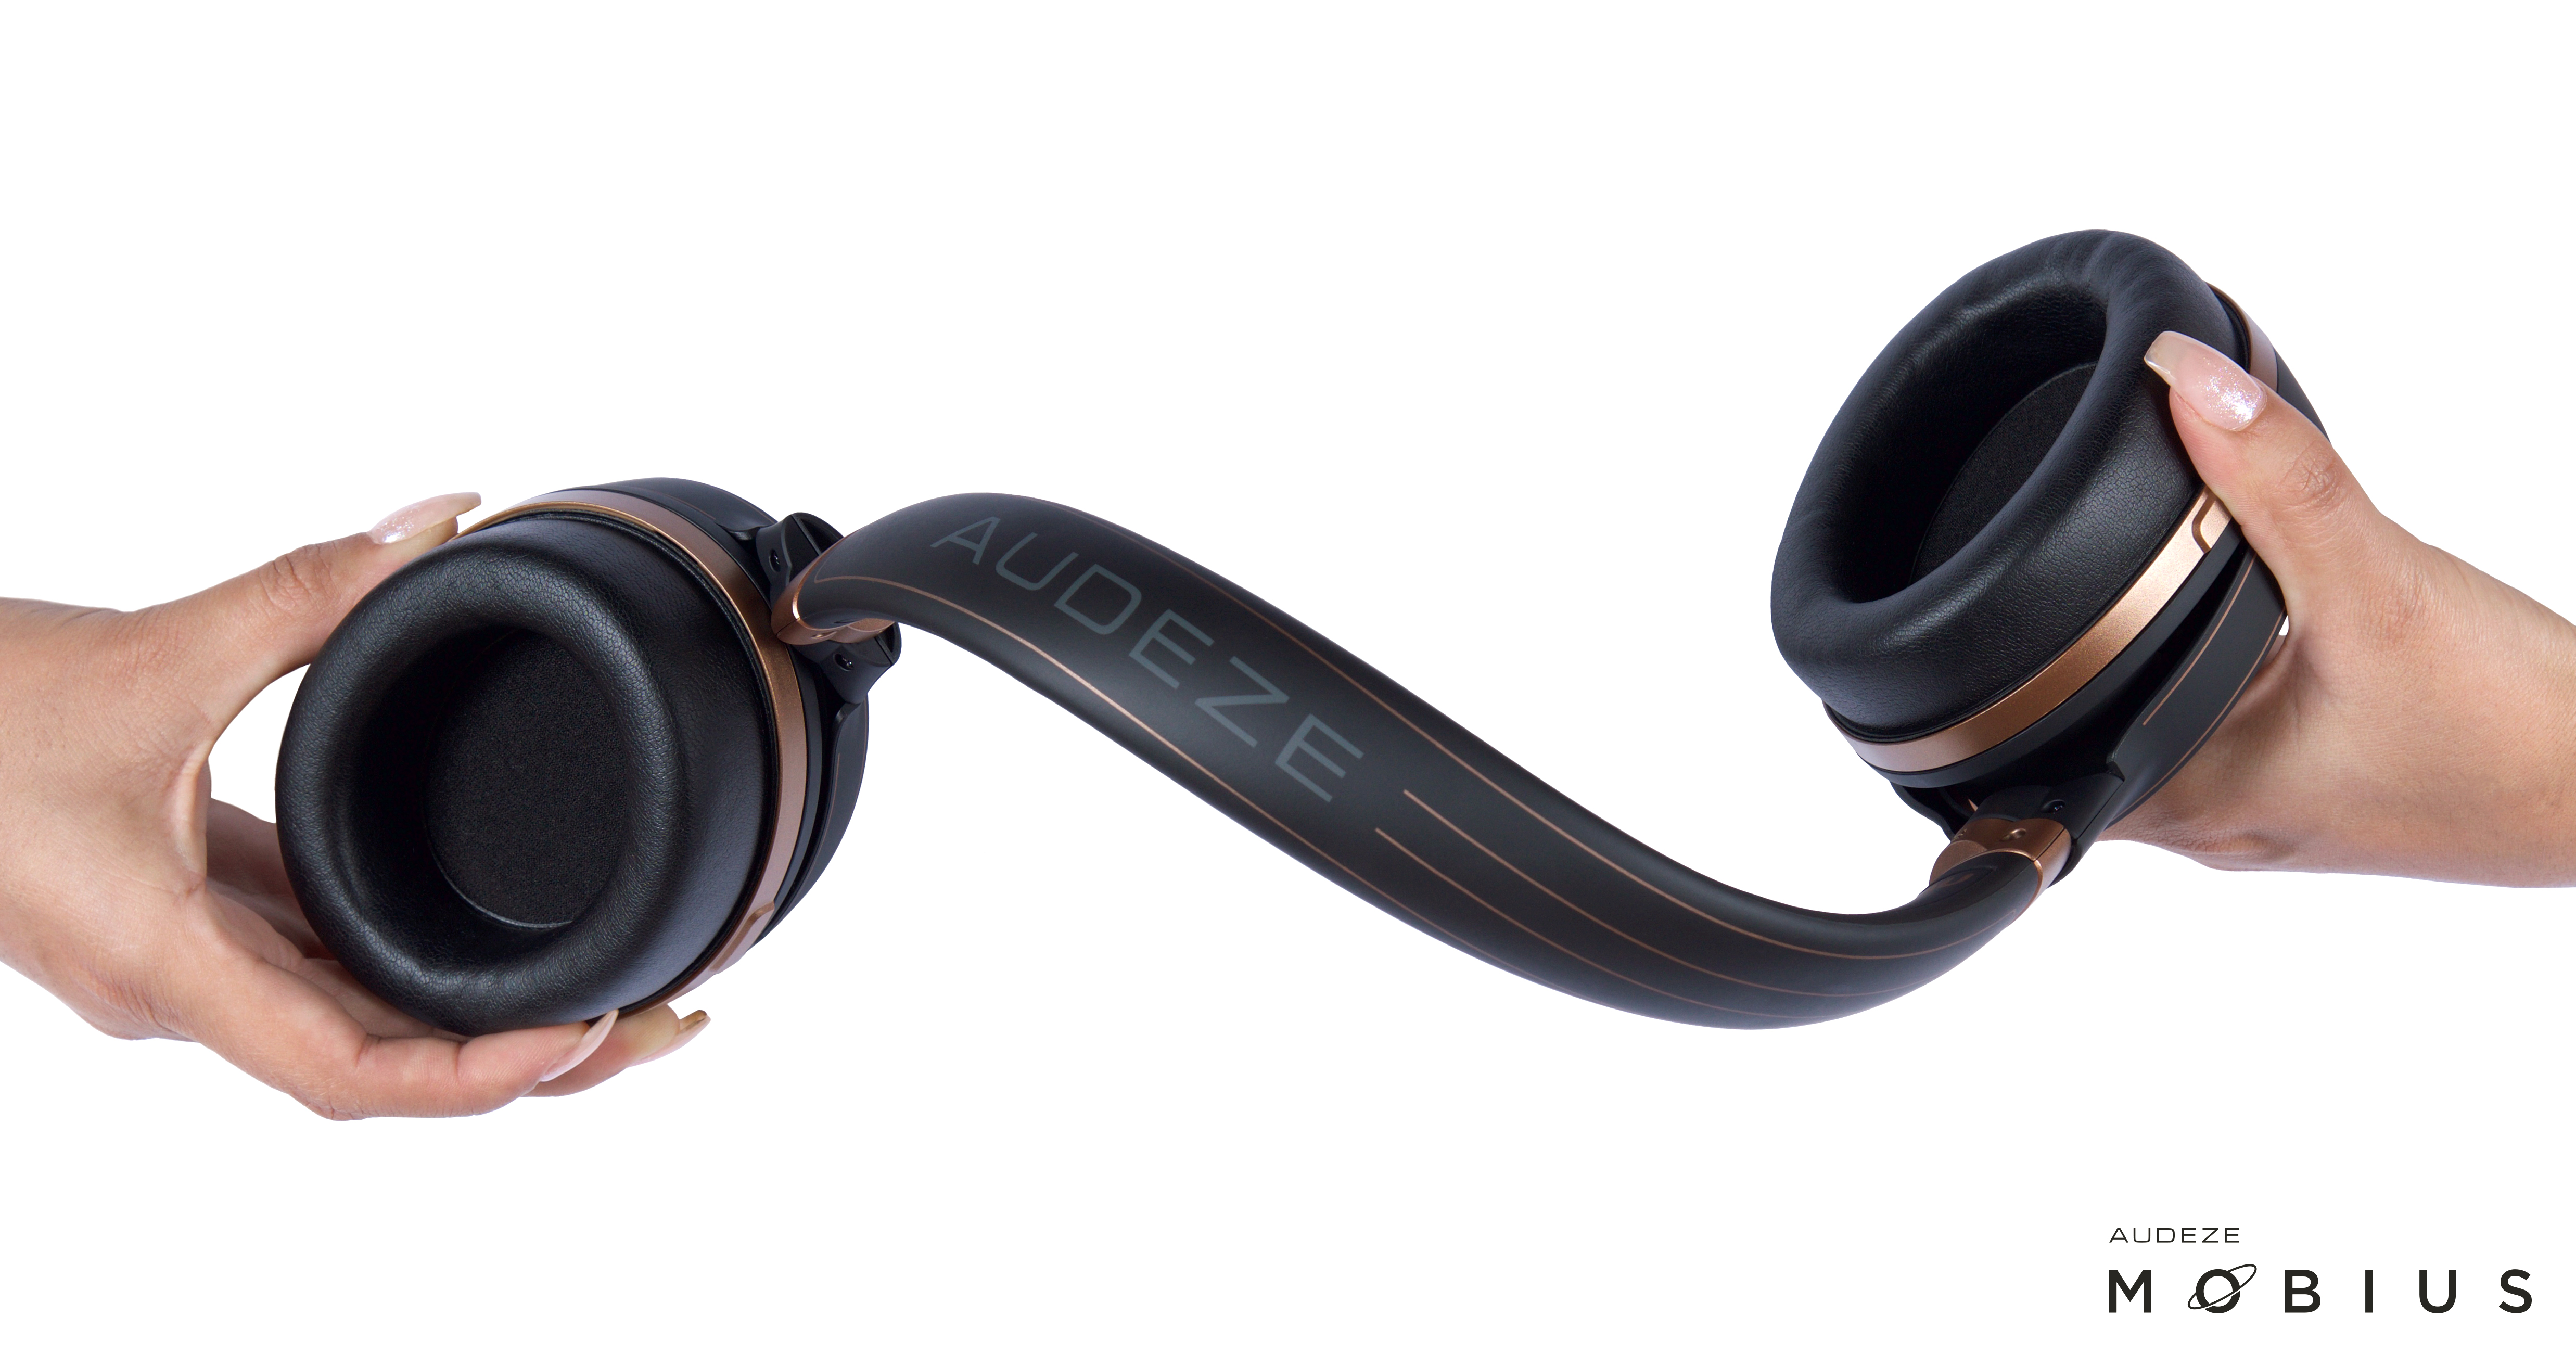 Audeze Mobius: Built for comfort and durability